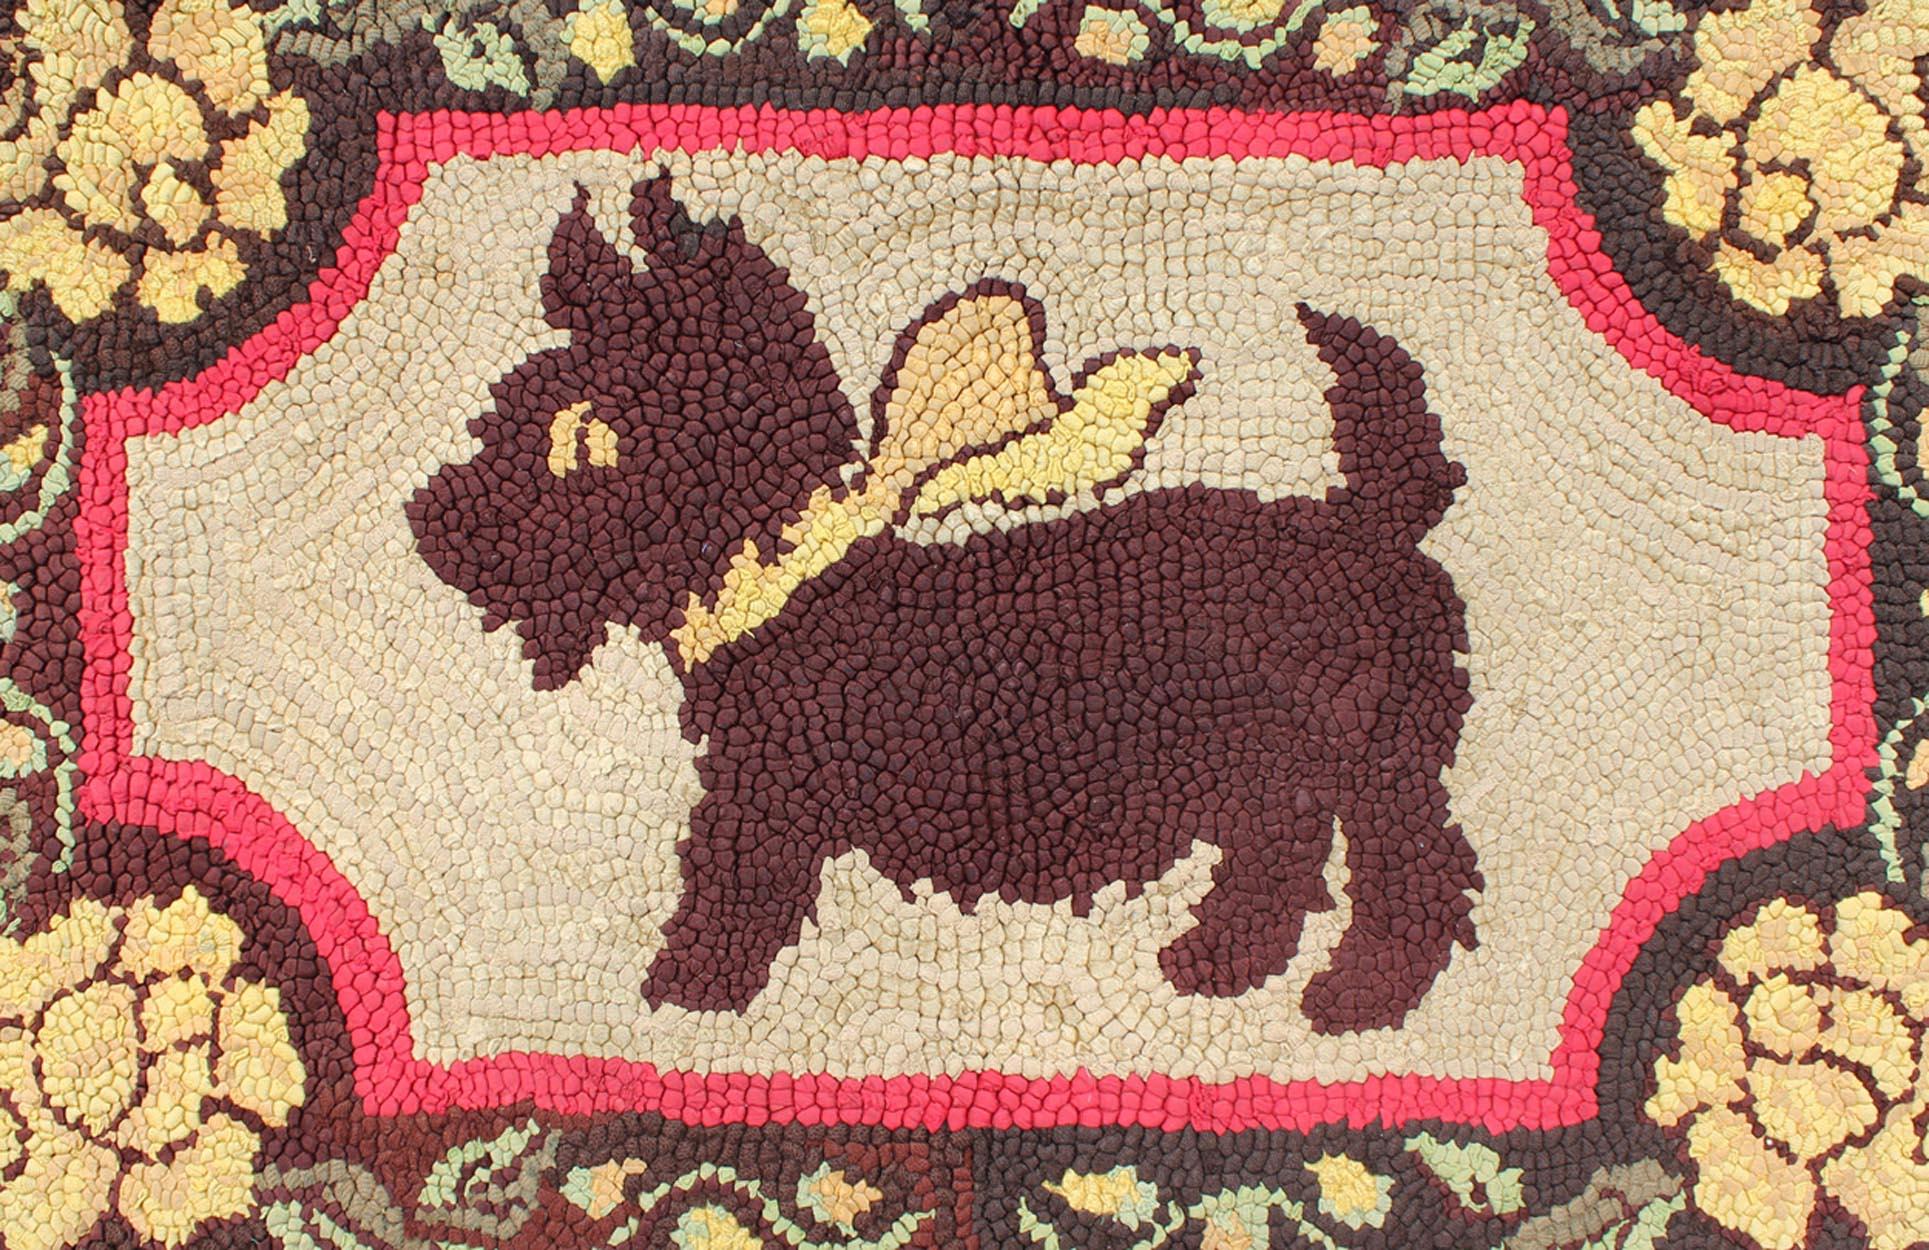 Hand-Woven American Hooked Rug with a Scottie Dog with a Ribbon Around It